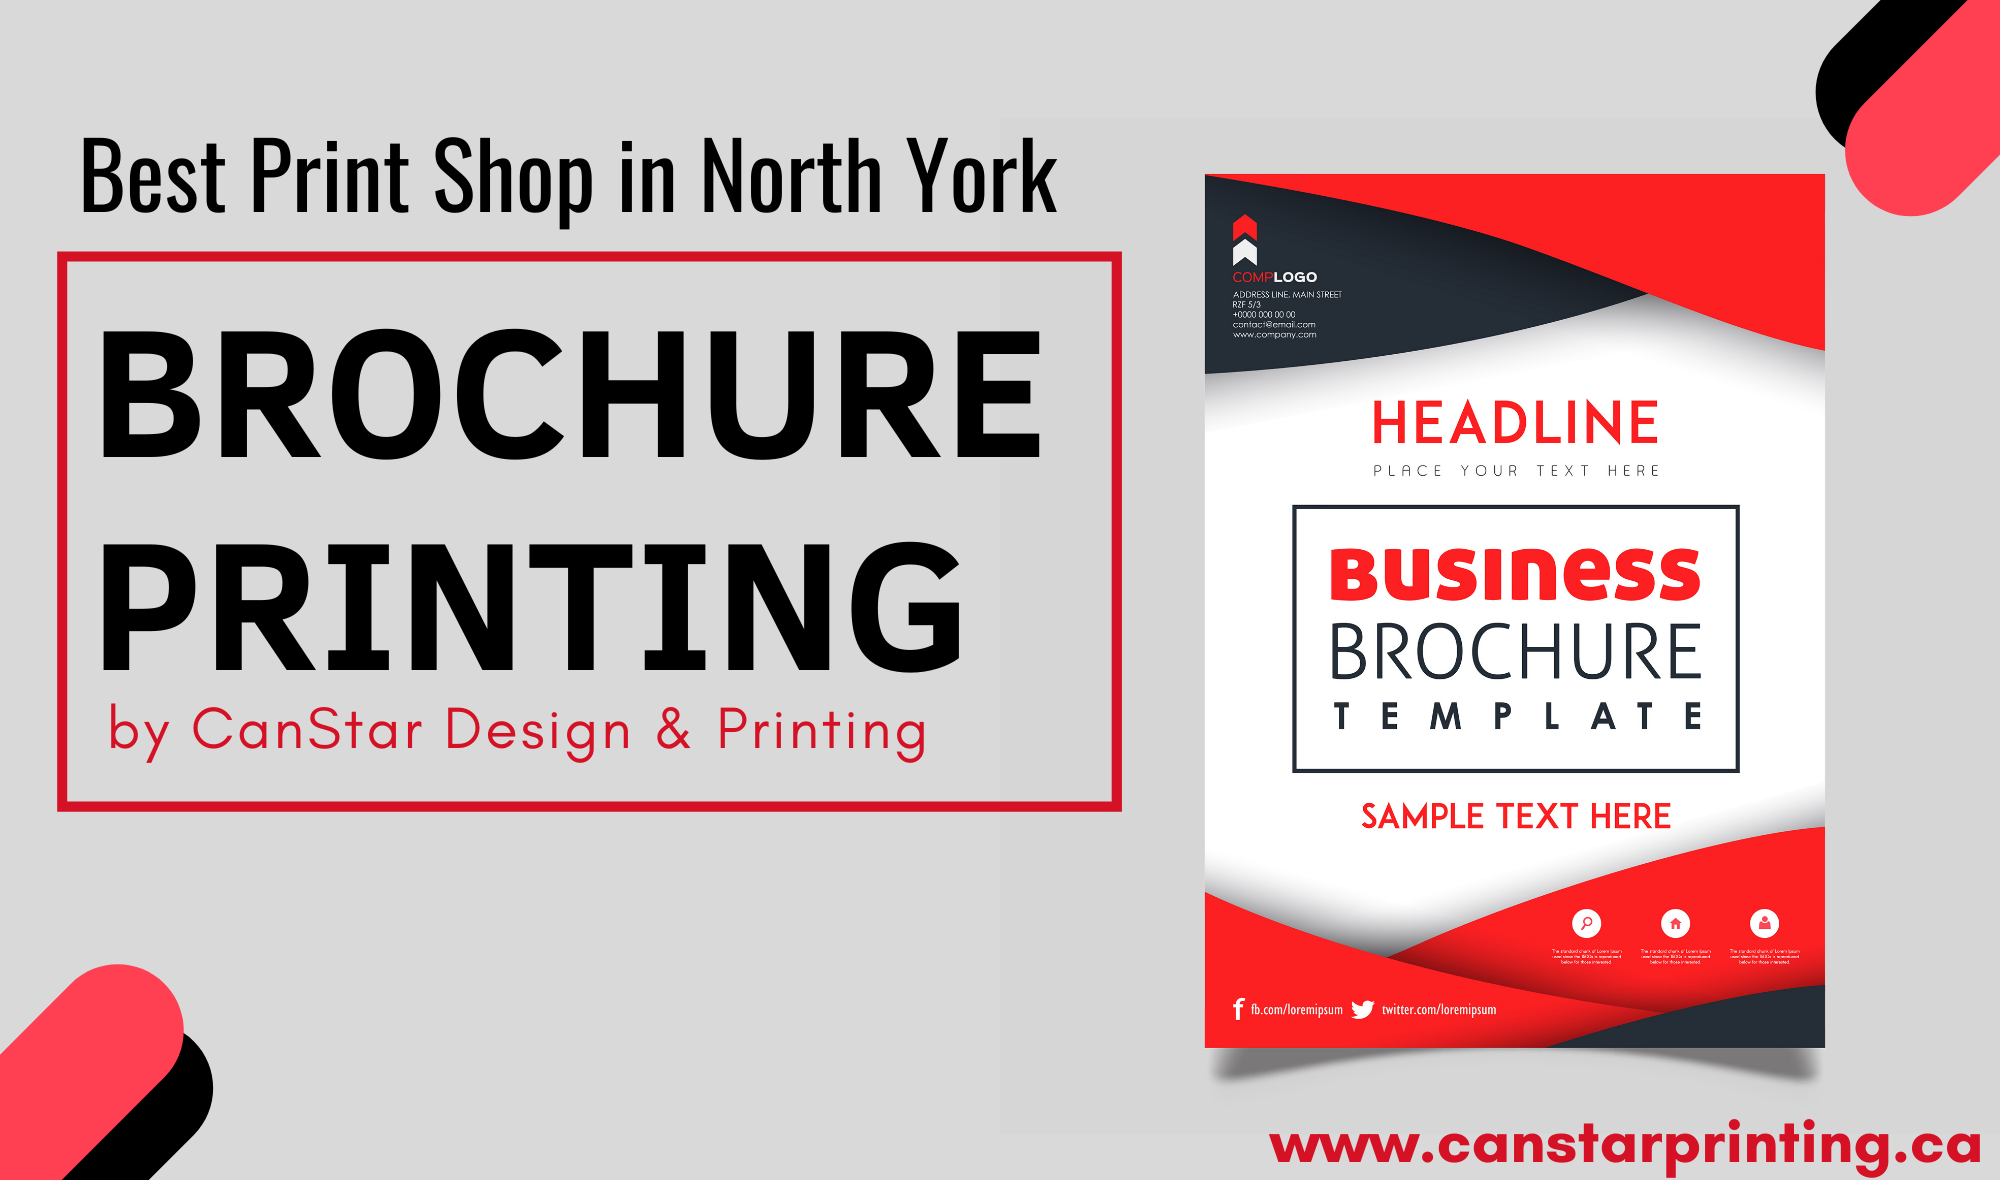 How to Get Best Brochure Design With Your North York Print Shop